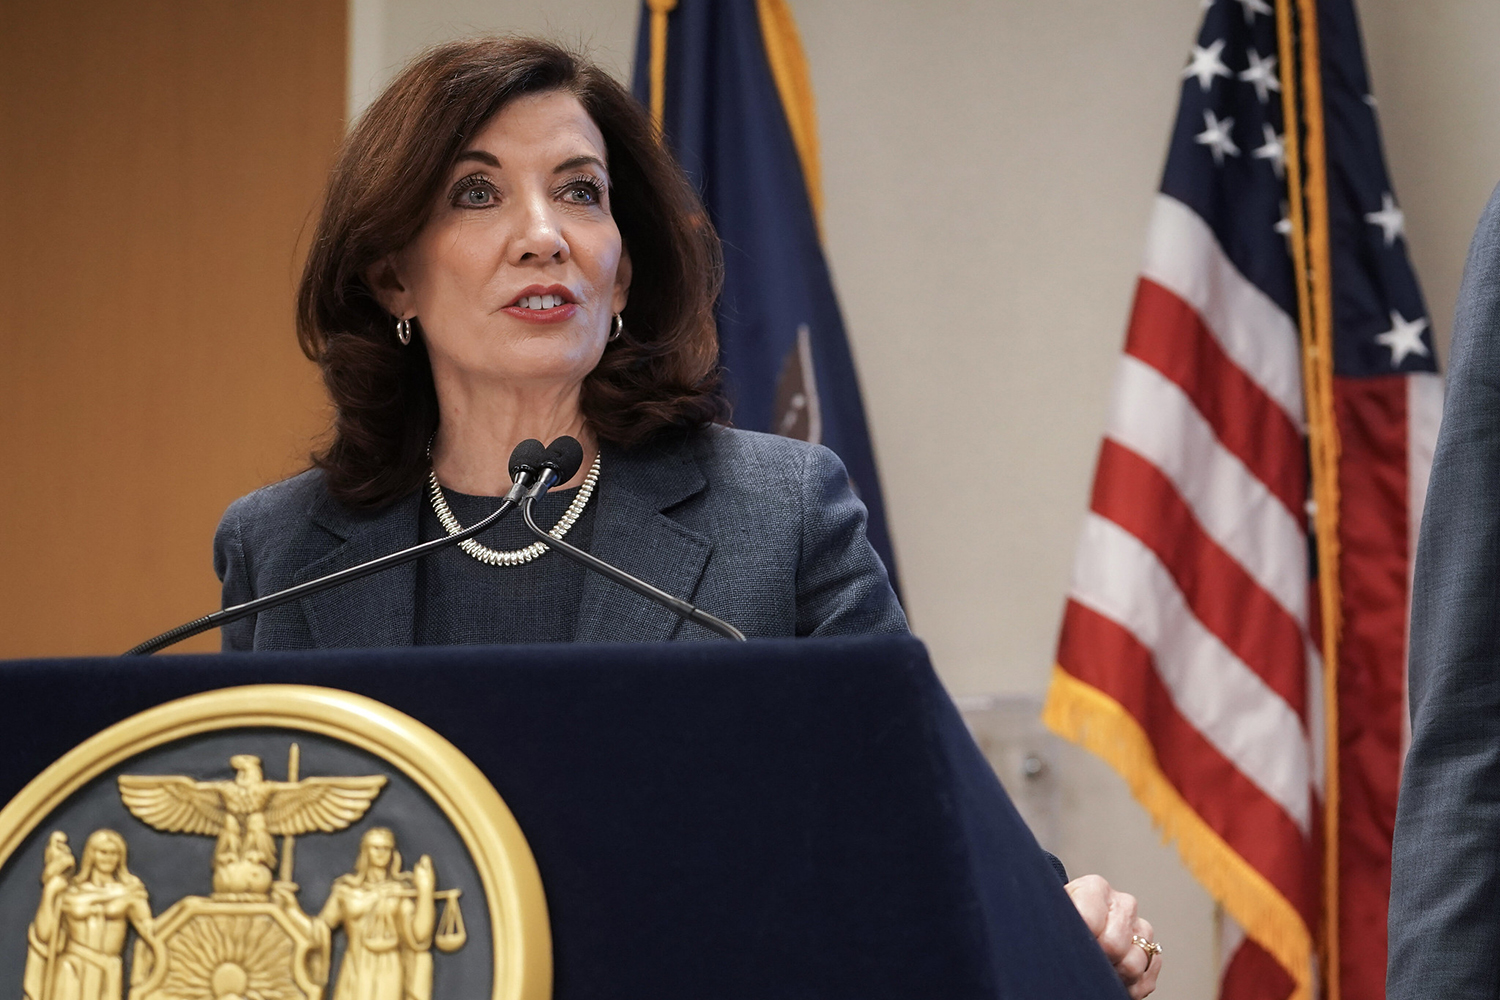 NY Governor Kathy Hochul speaking at a podium